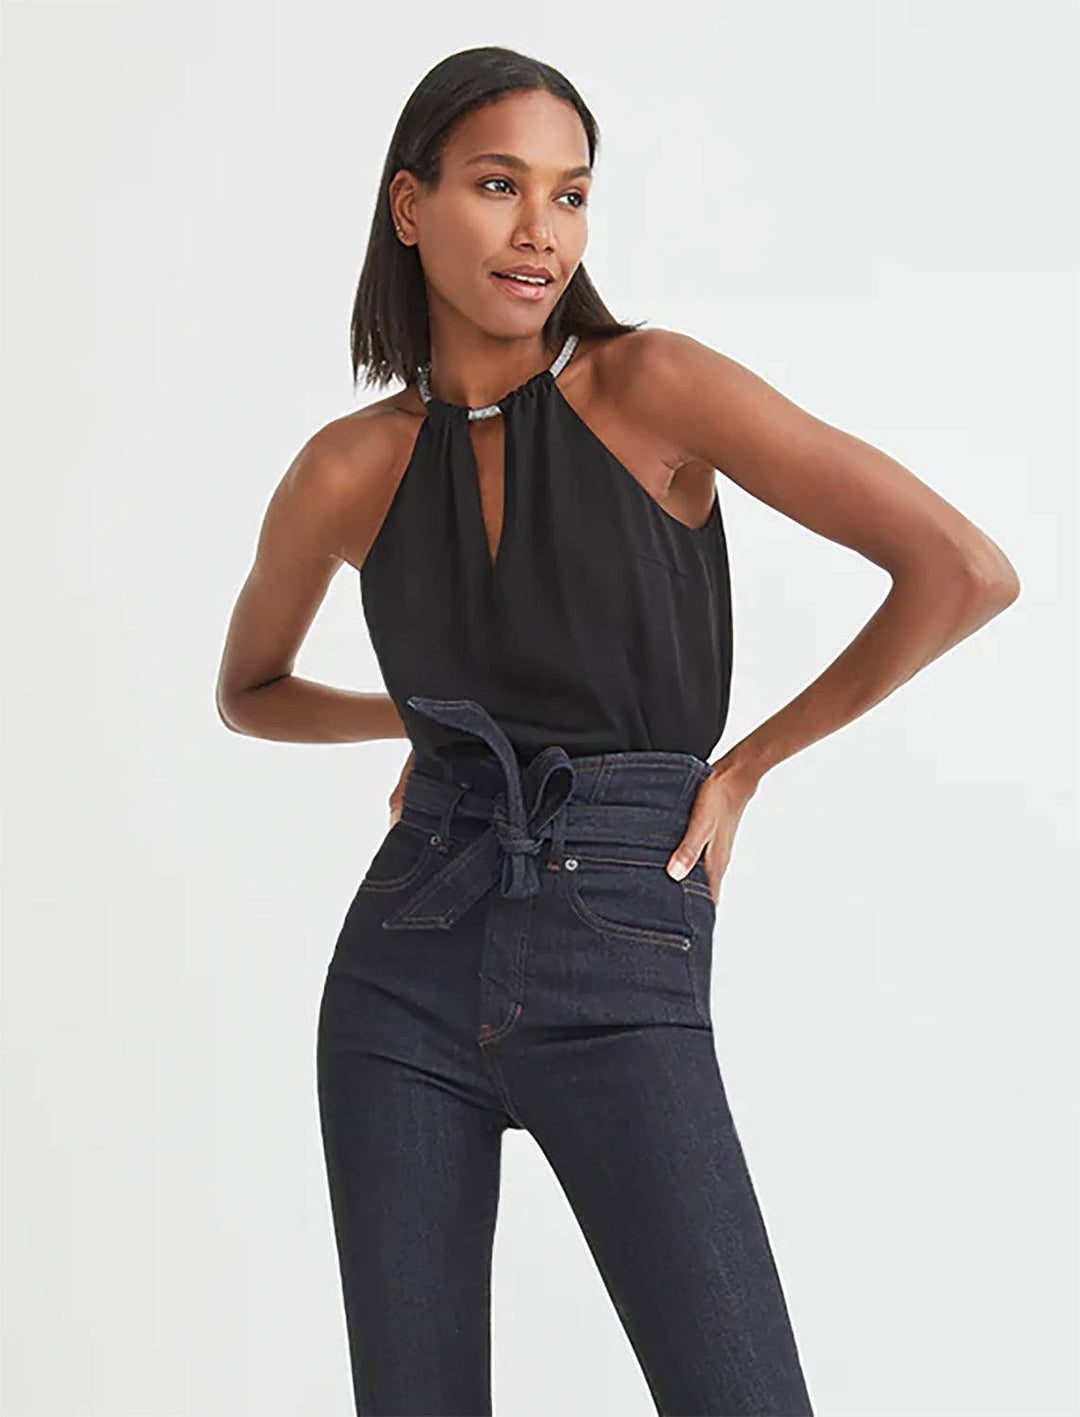 Model wearing Veronica Beard's Kusumi Top in Black. Model pairs the tank with a pair of dark wash jeans.